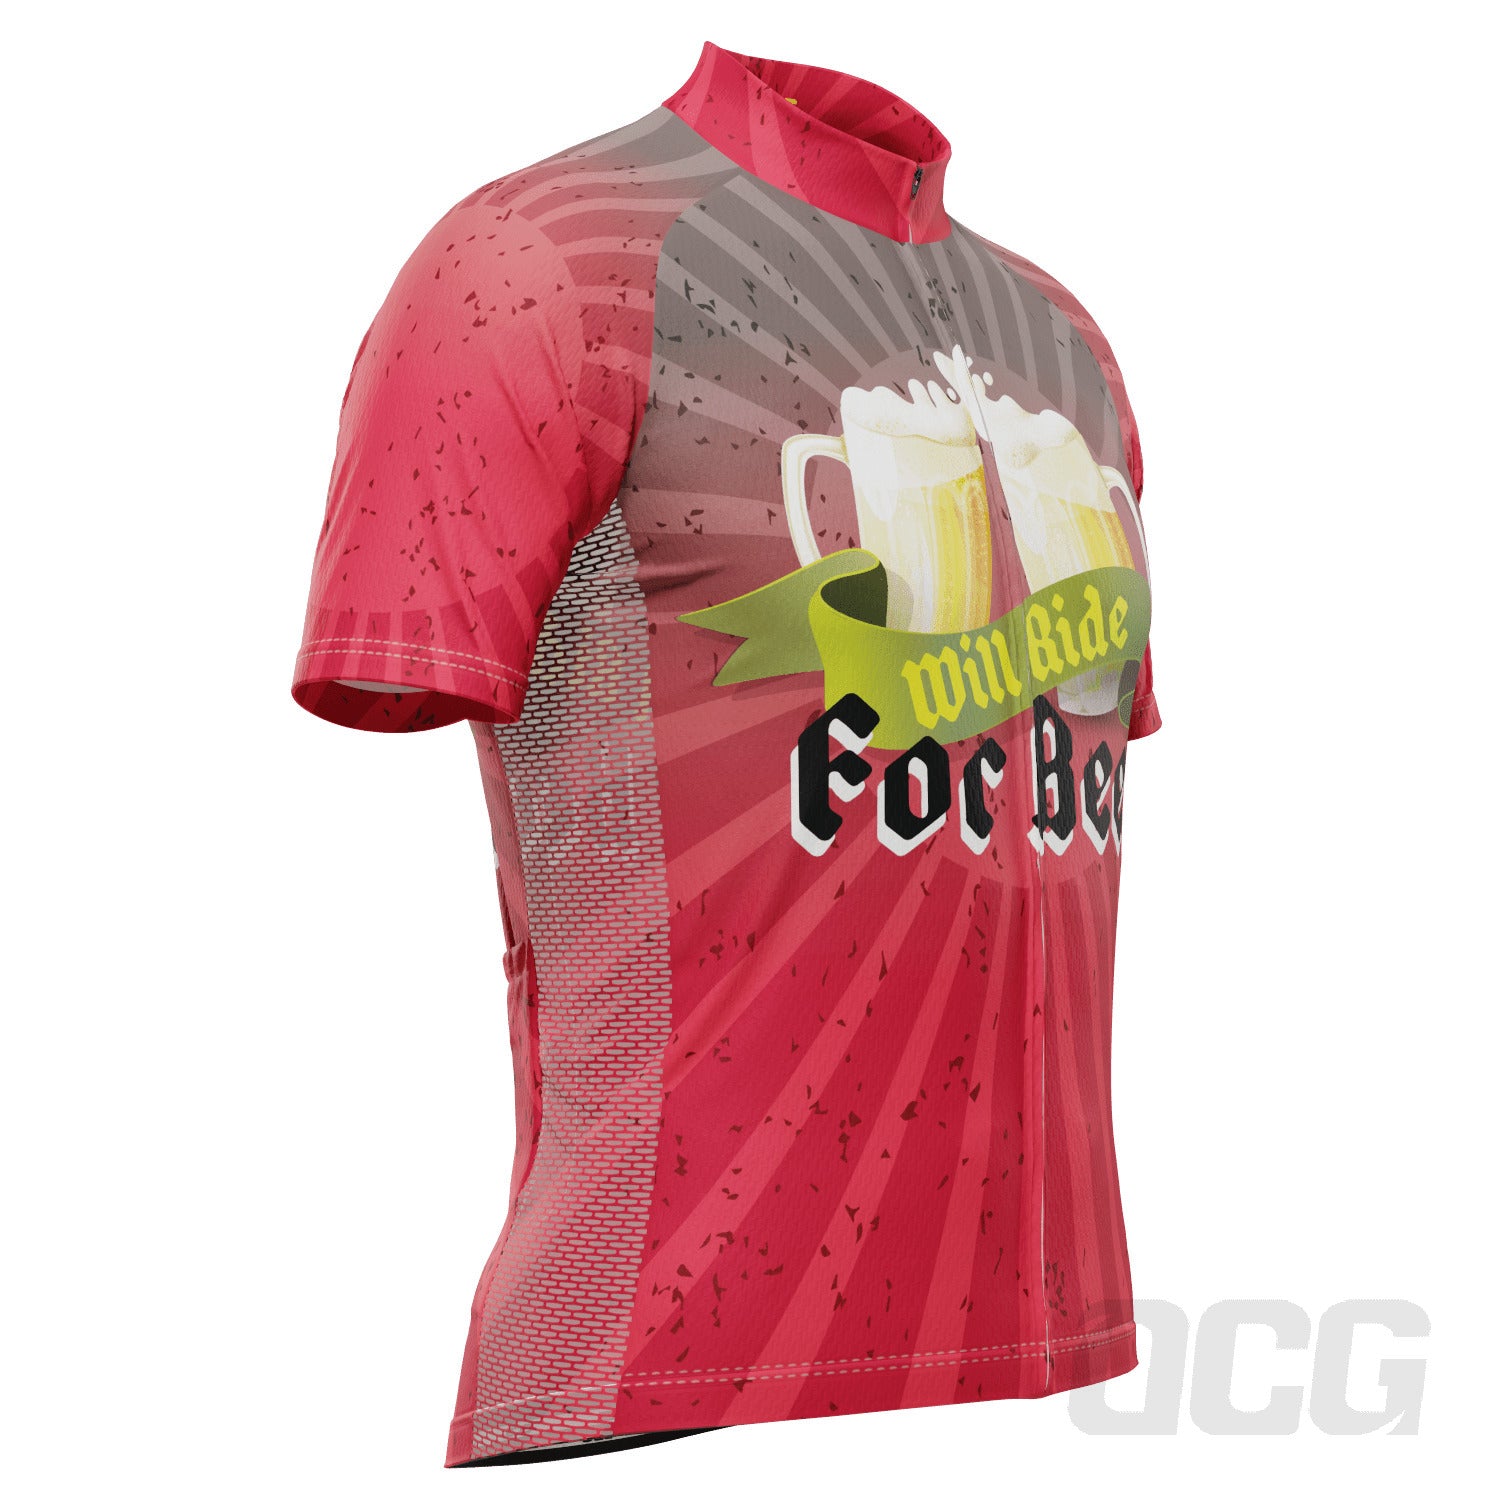 Men's Will Ride for Beer Short Sleeve Cycling Jersey